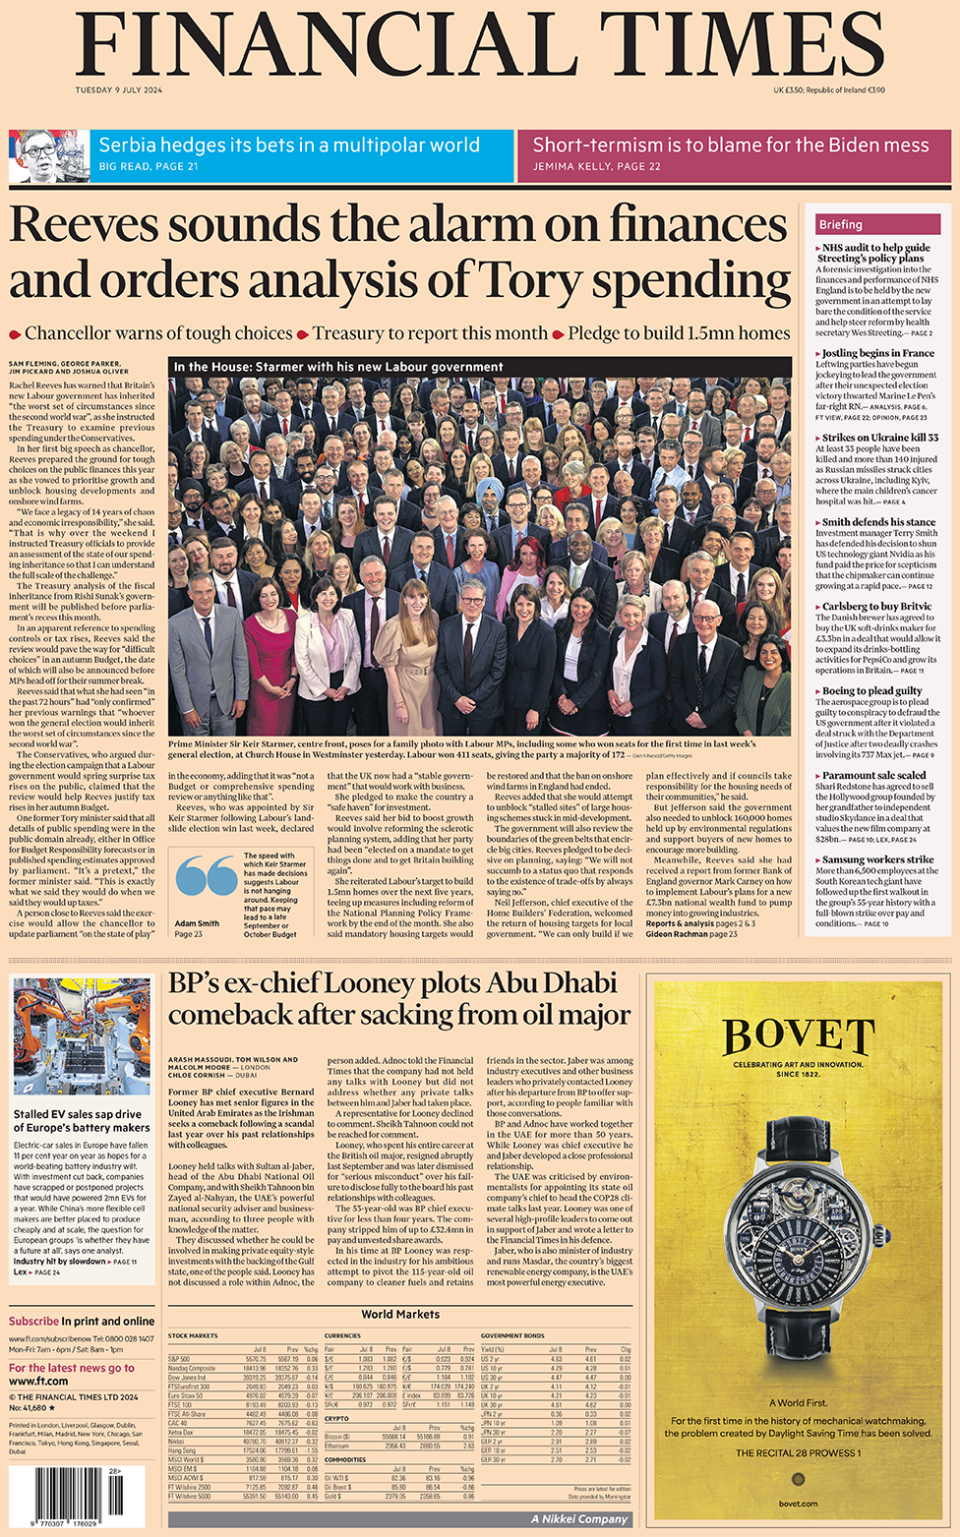 Front page of the FT, with a headline about Rachel Reeves ordering an analysis of Tory spending